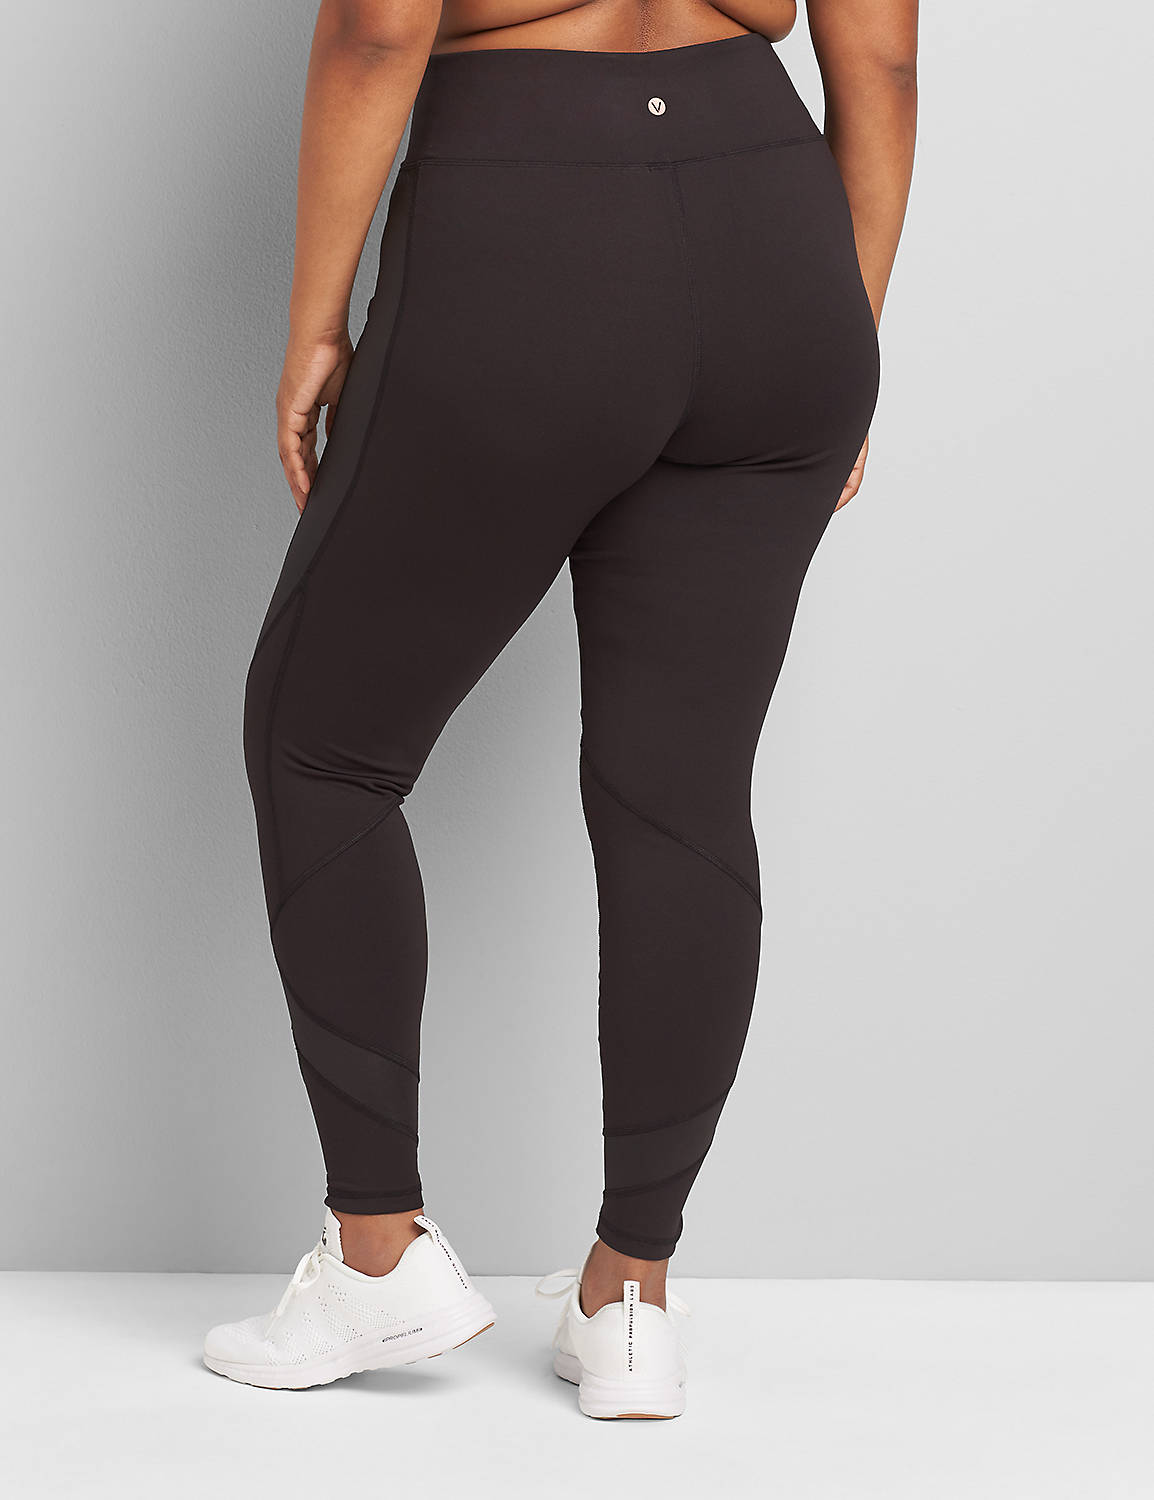 LIVI 7/8 Power Legging With Wicking - Shine Spliced Product Image 2